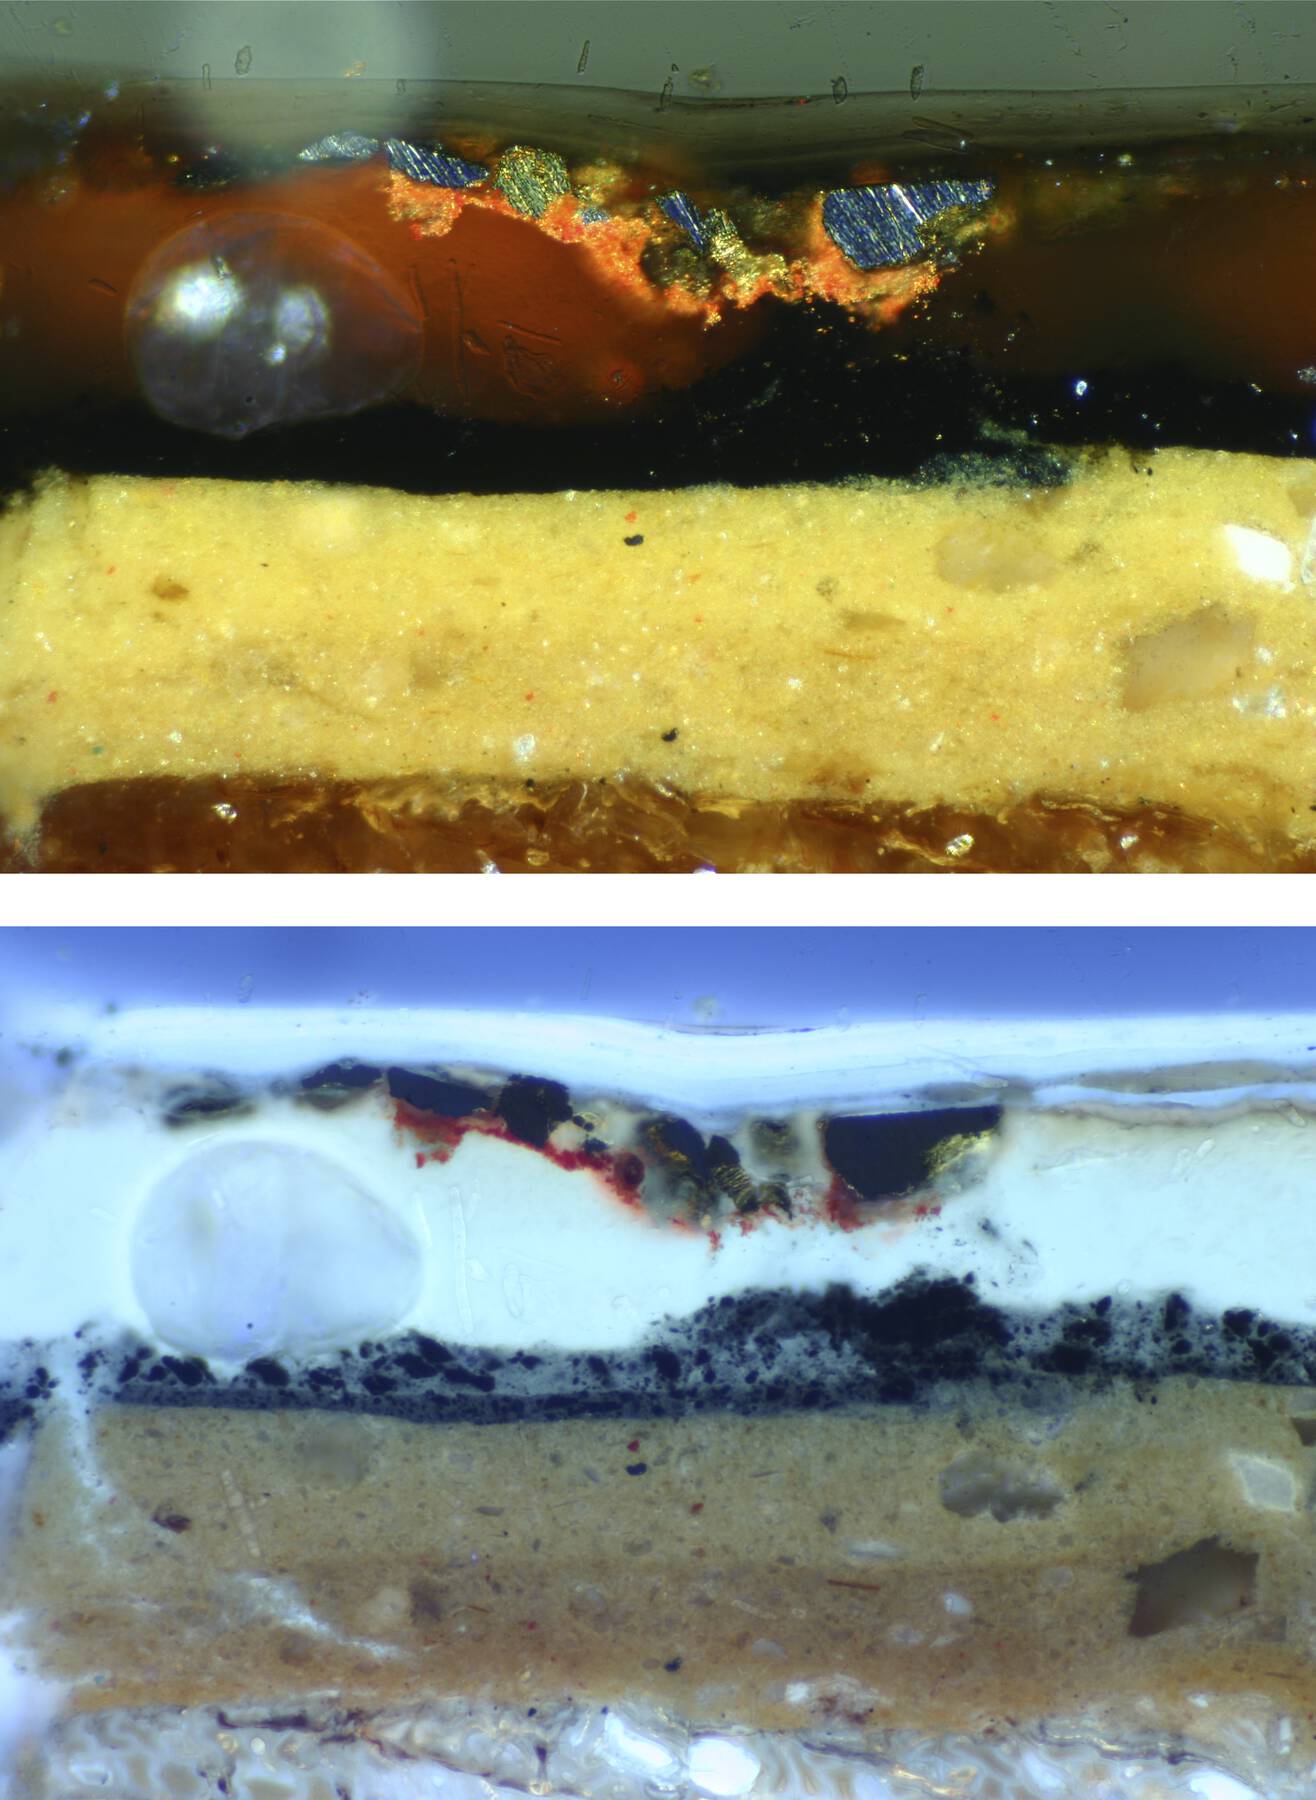 two photomicrographs of the layers of the painted lacquer on the middle register, one under visible light and one under ultraviolet light, revealing the metal powders used in the lacquer